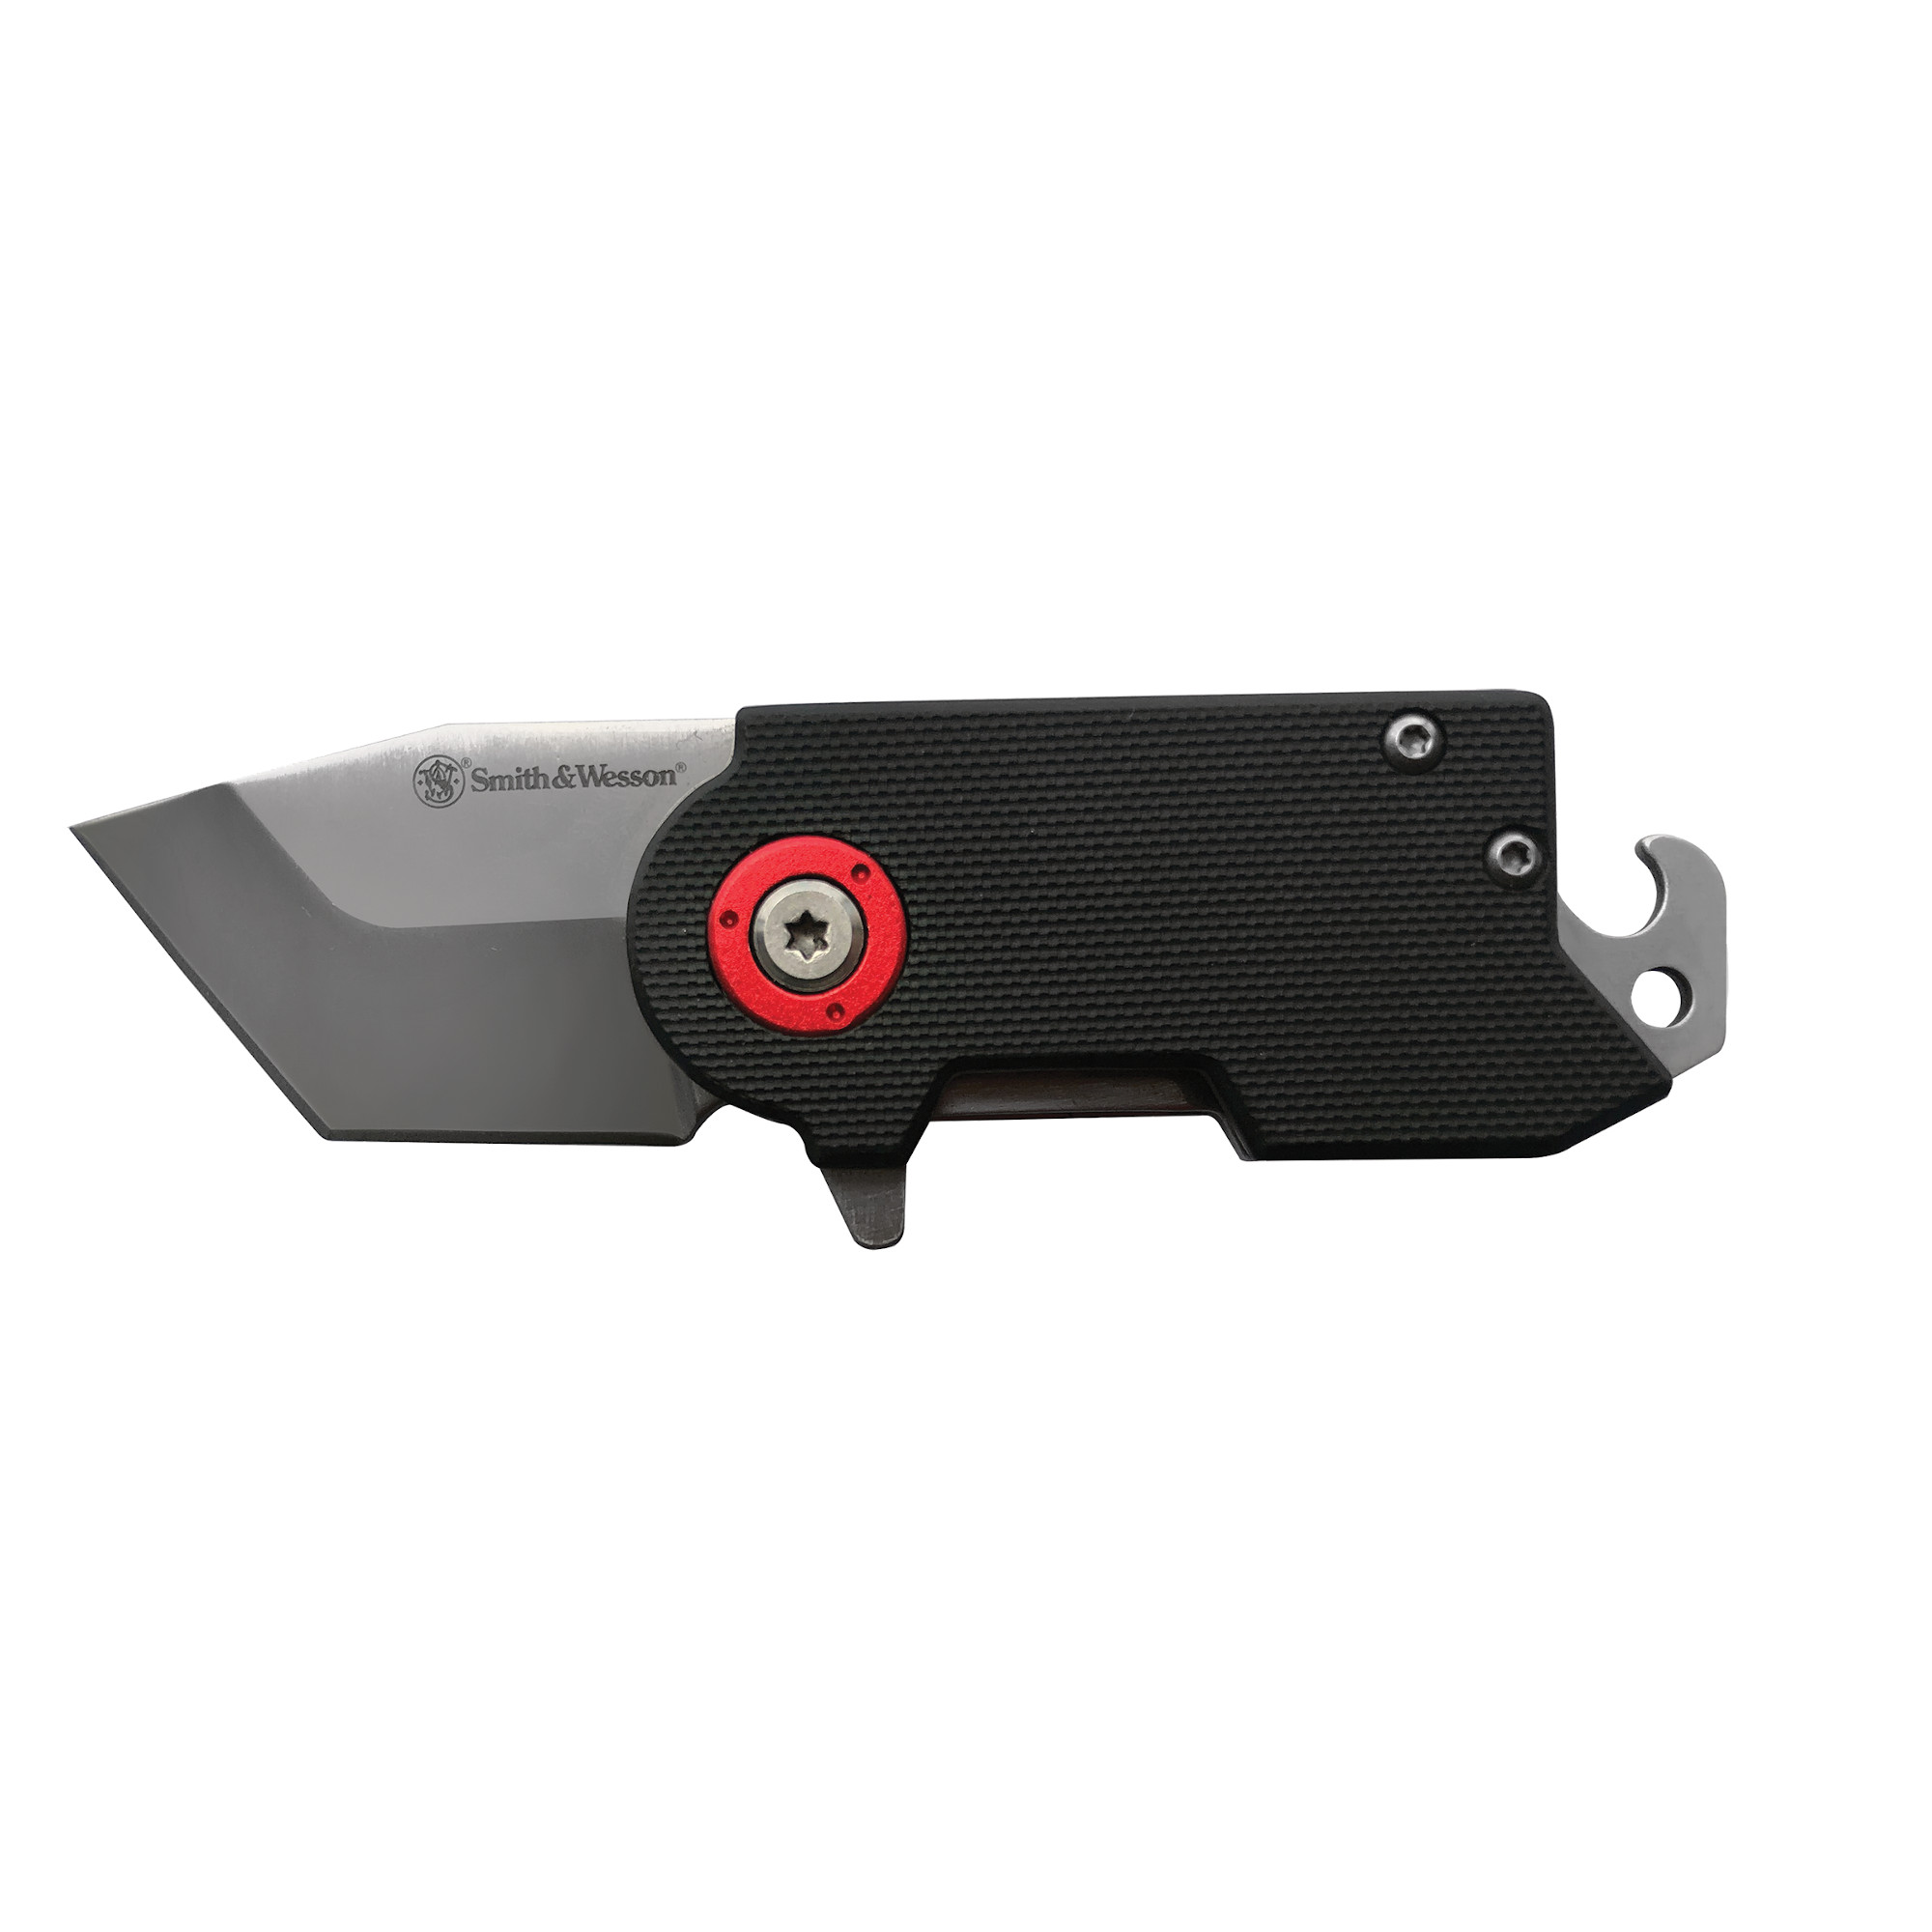 Smith & Wesson Knife Sharpener Multi-Tool - Blade HQ